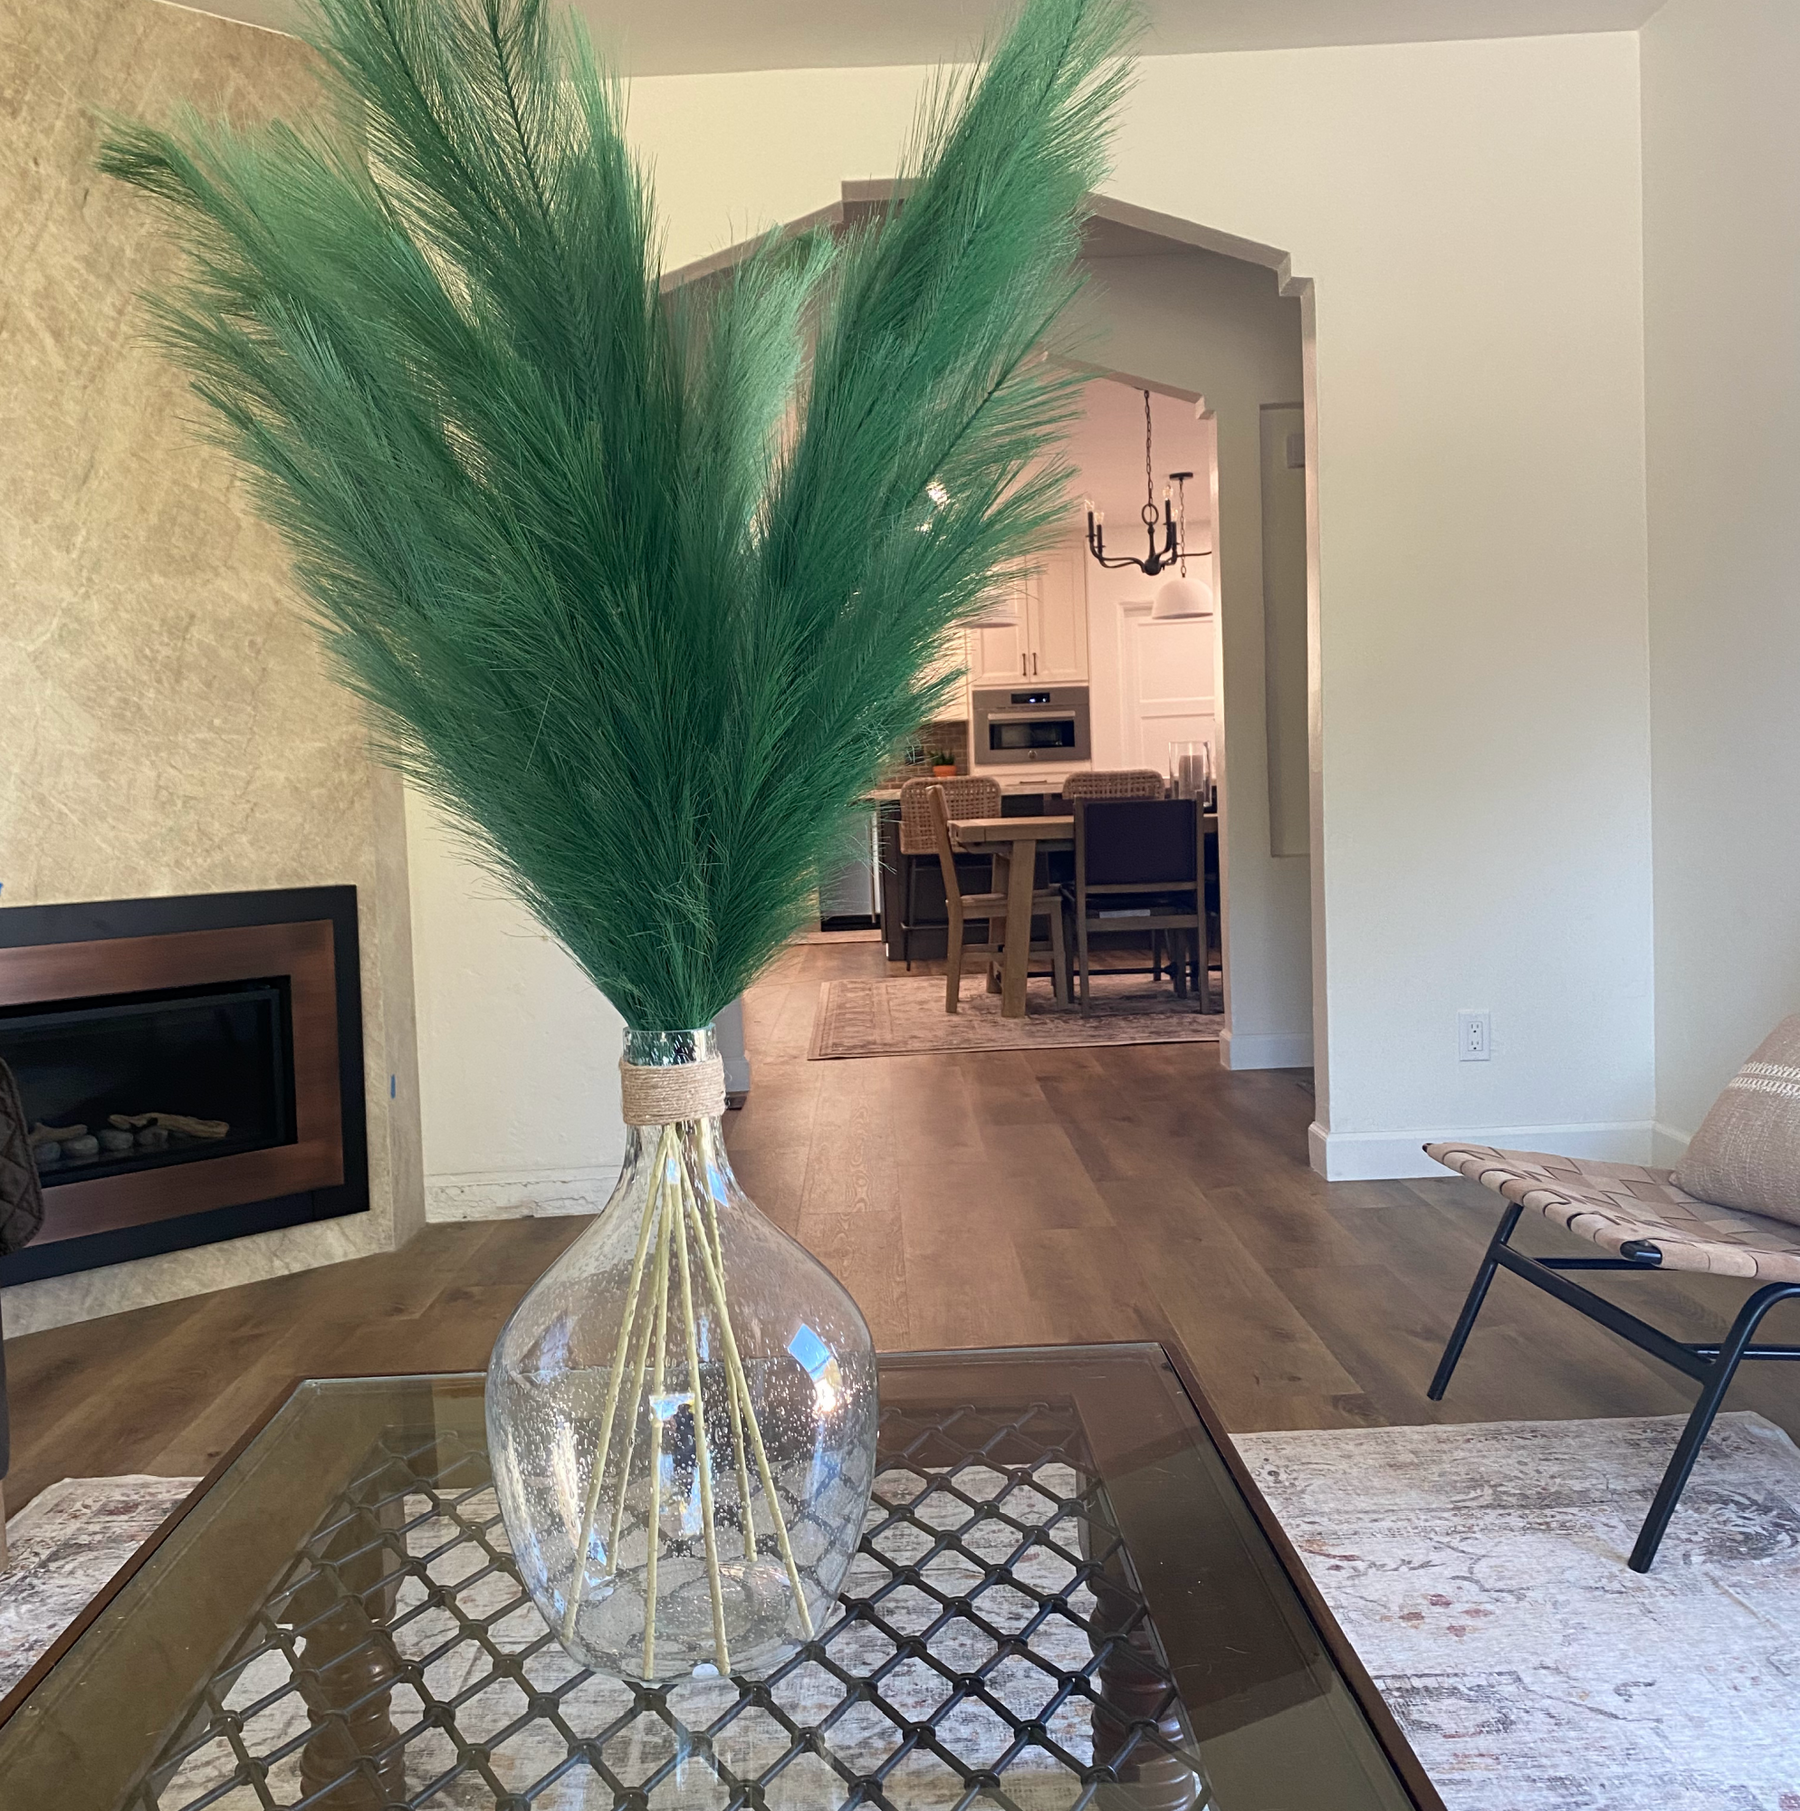 Tall Faux Pampas 43.5 Inches with 18 Branches Per Stem Emerald Green